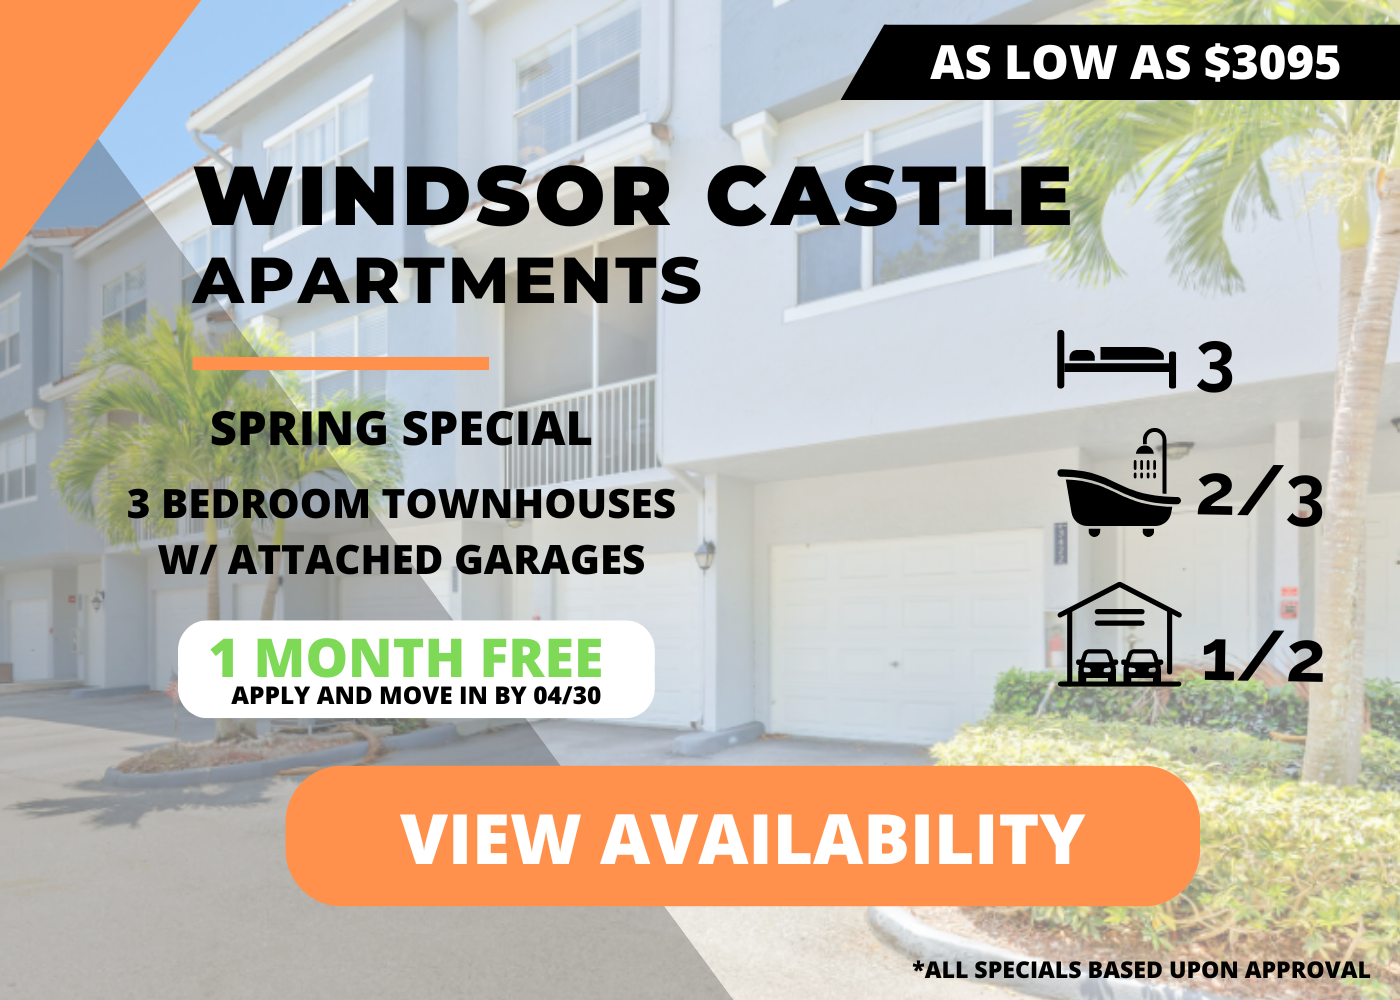 Spring Special – Three Bedroom Townhomes with Attached Garages as low as $3095! One Month Free – Apply and Move in by April 30